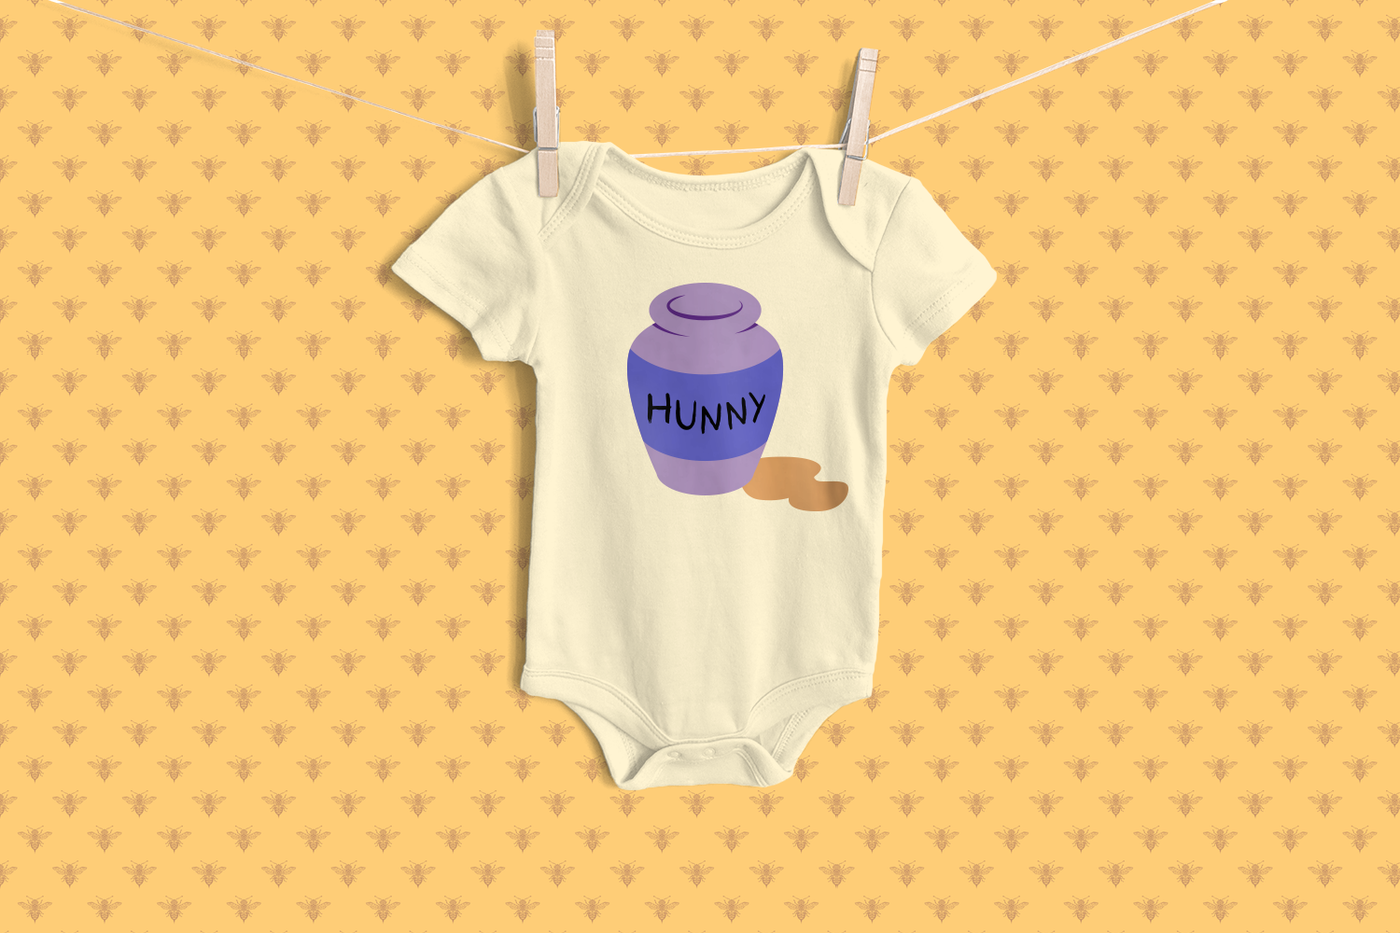 Baby onesie with a pot that says "HUNNY" and some spilled honey.